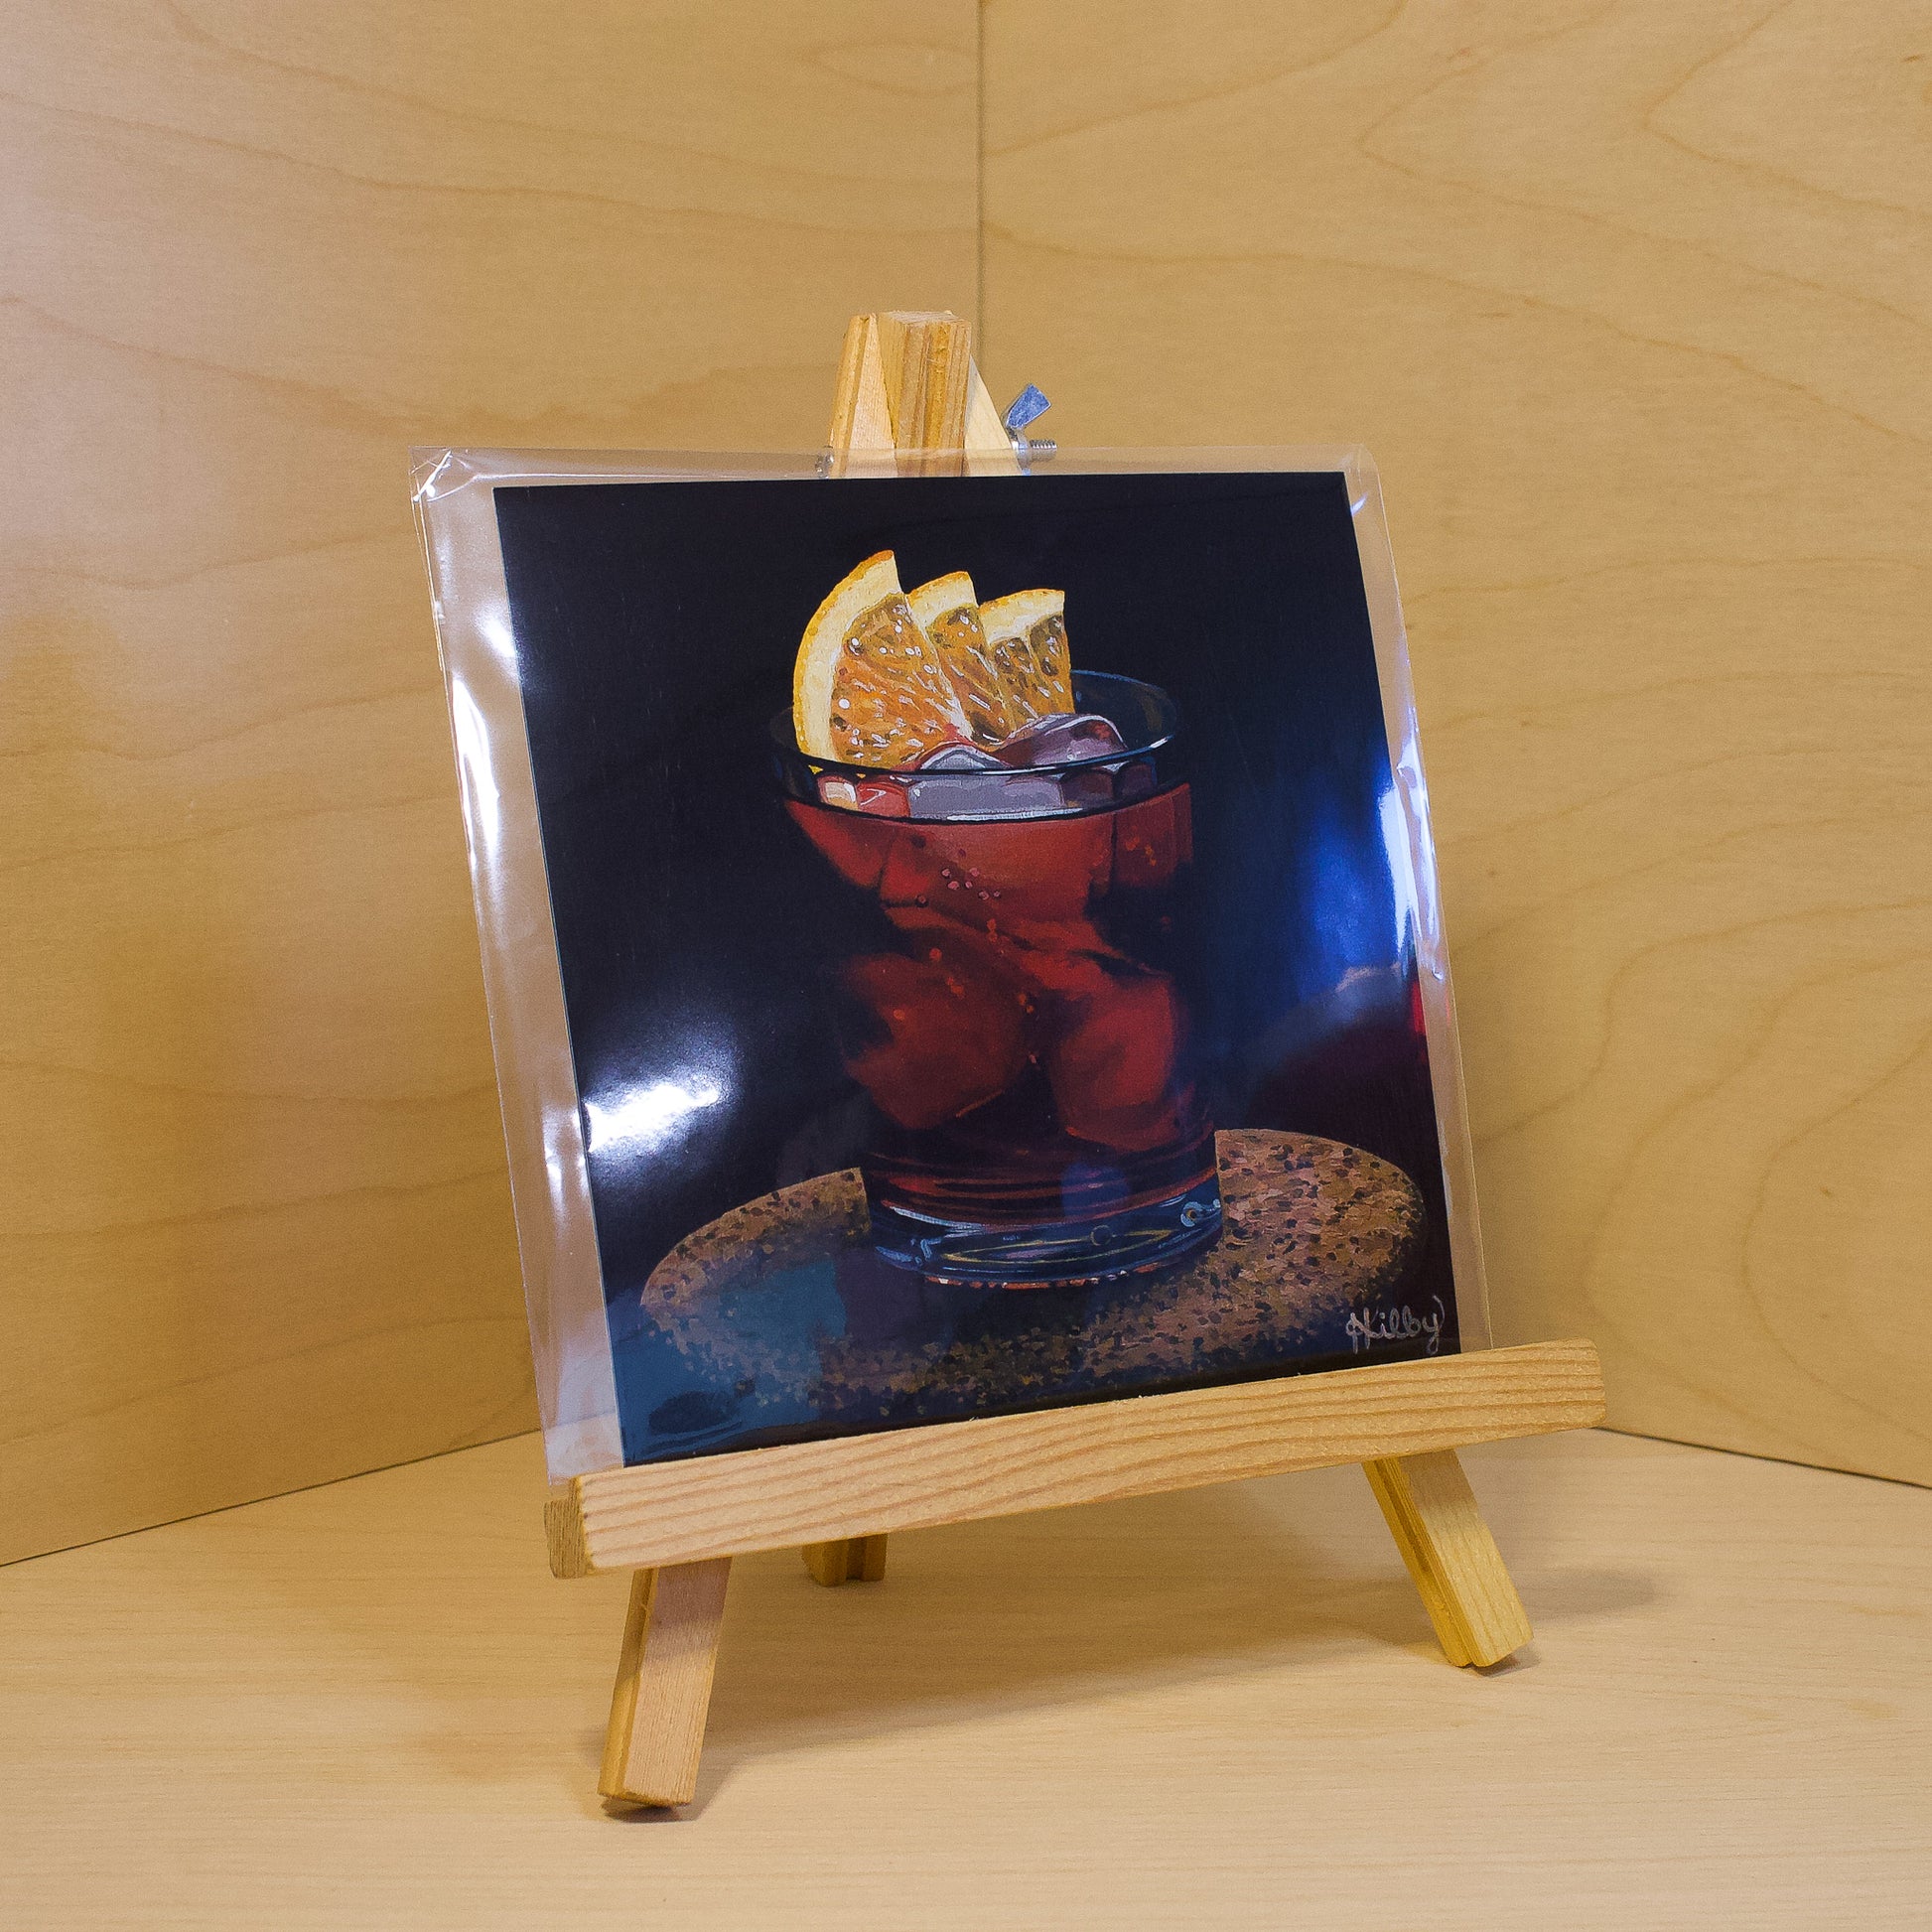 A 6x6" fine art print of the original acrylic painting "Negroni" by Hannah Kilby from Hannah Michelle Studios. Displayed in a protective plastic sleeve on a small, wooden easel.